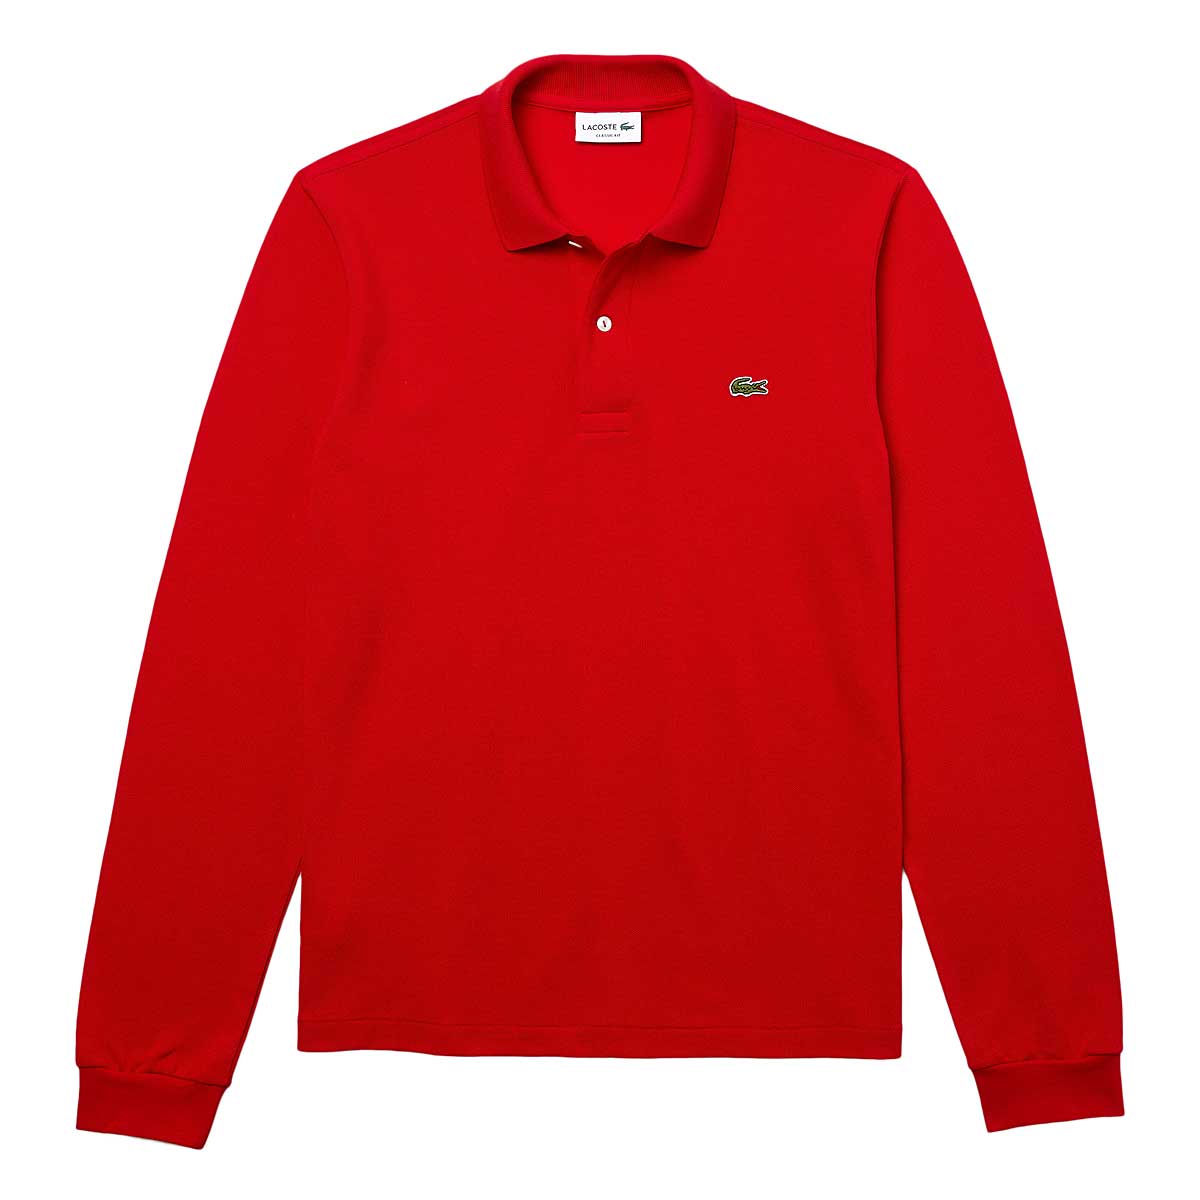 Lacoste Small Croc Longsleeve Polo, Red